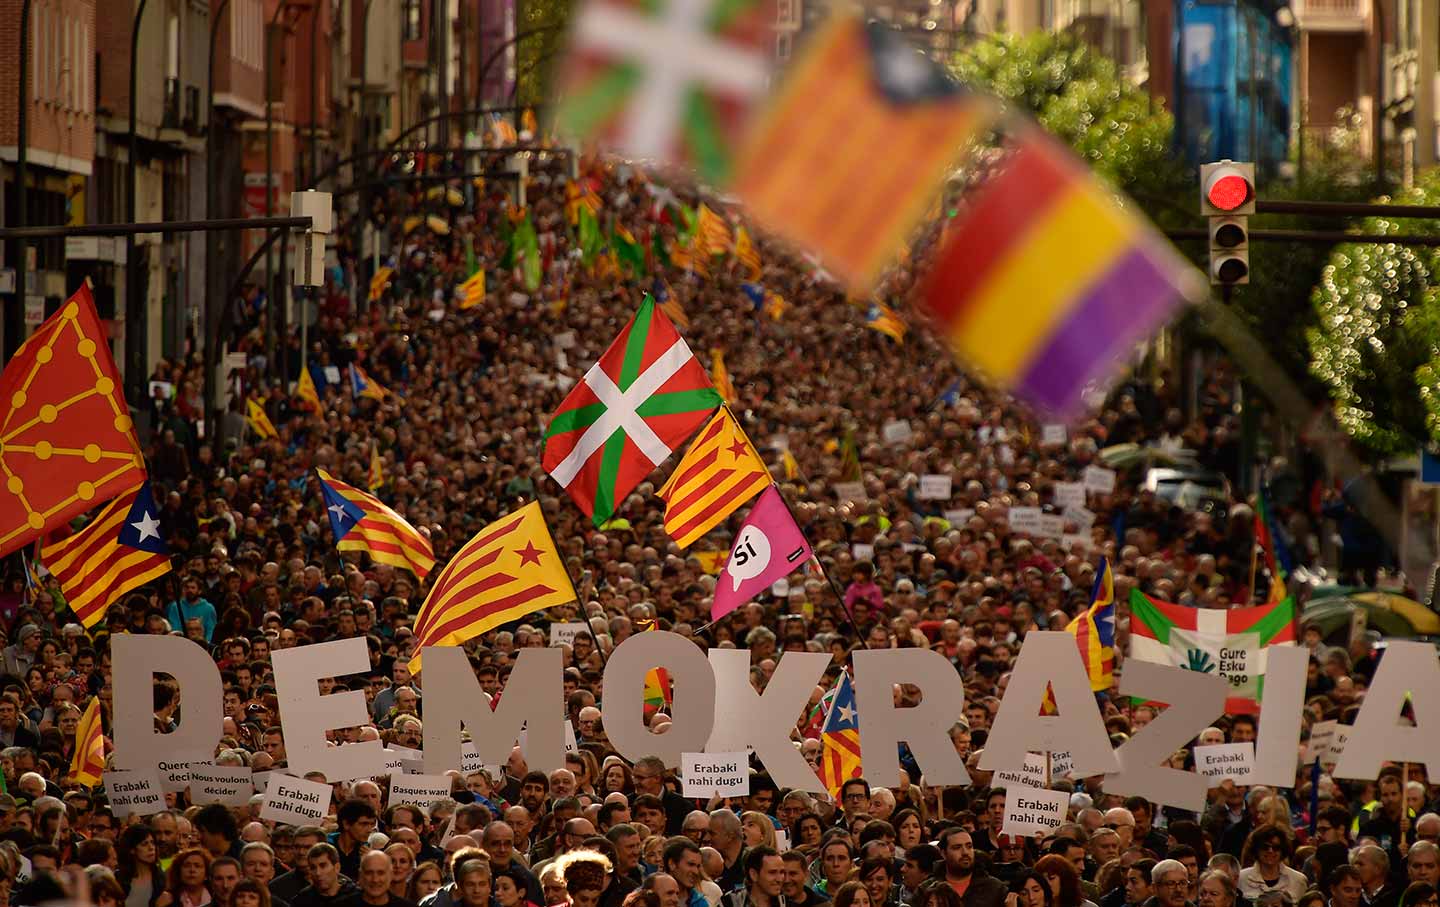 A pro-independence rally